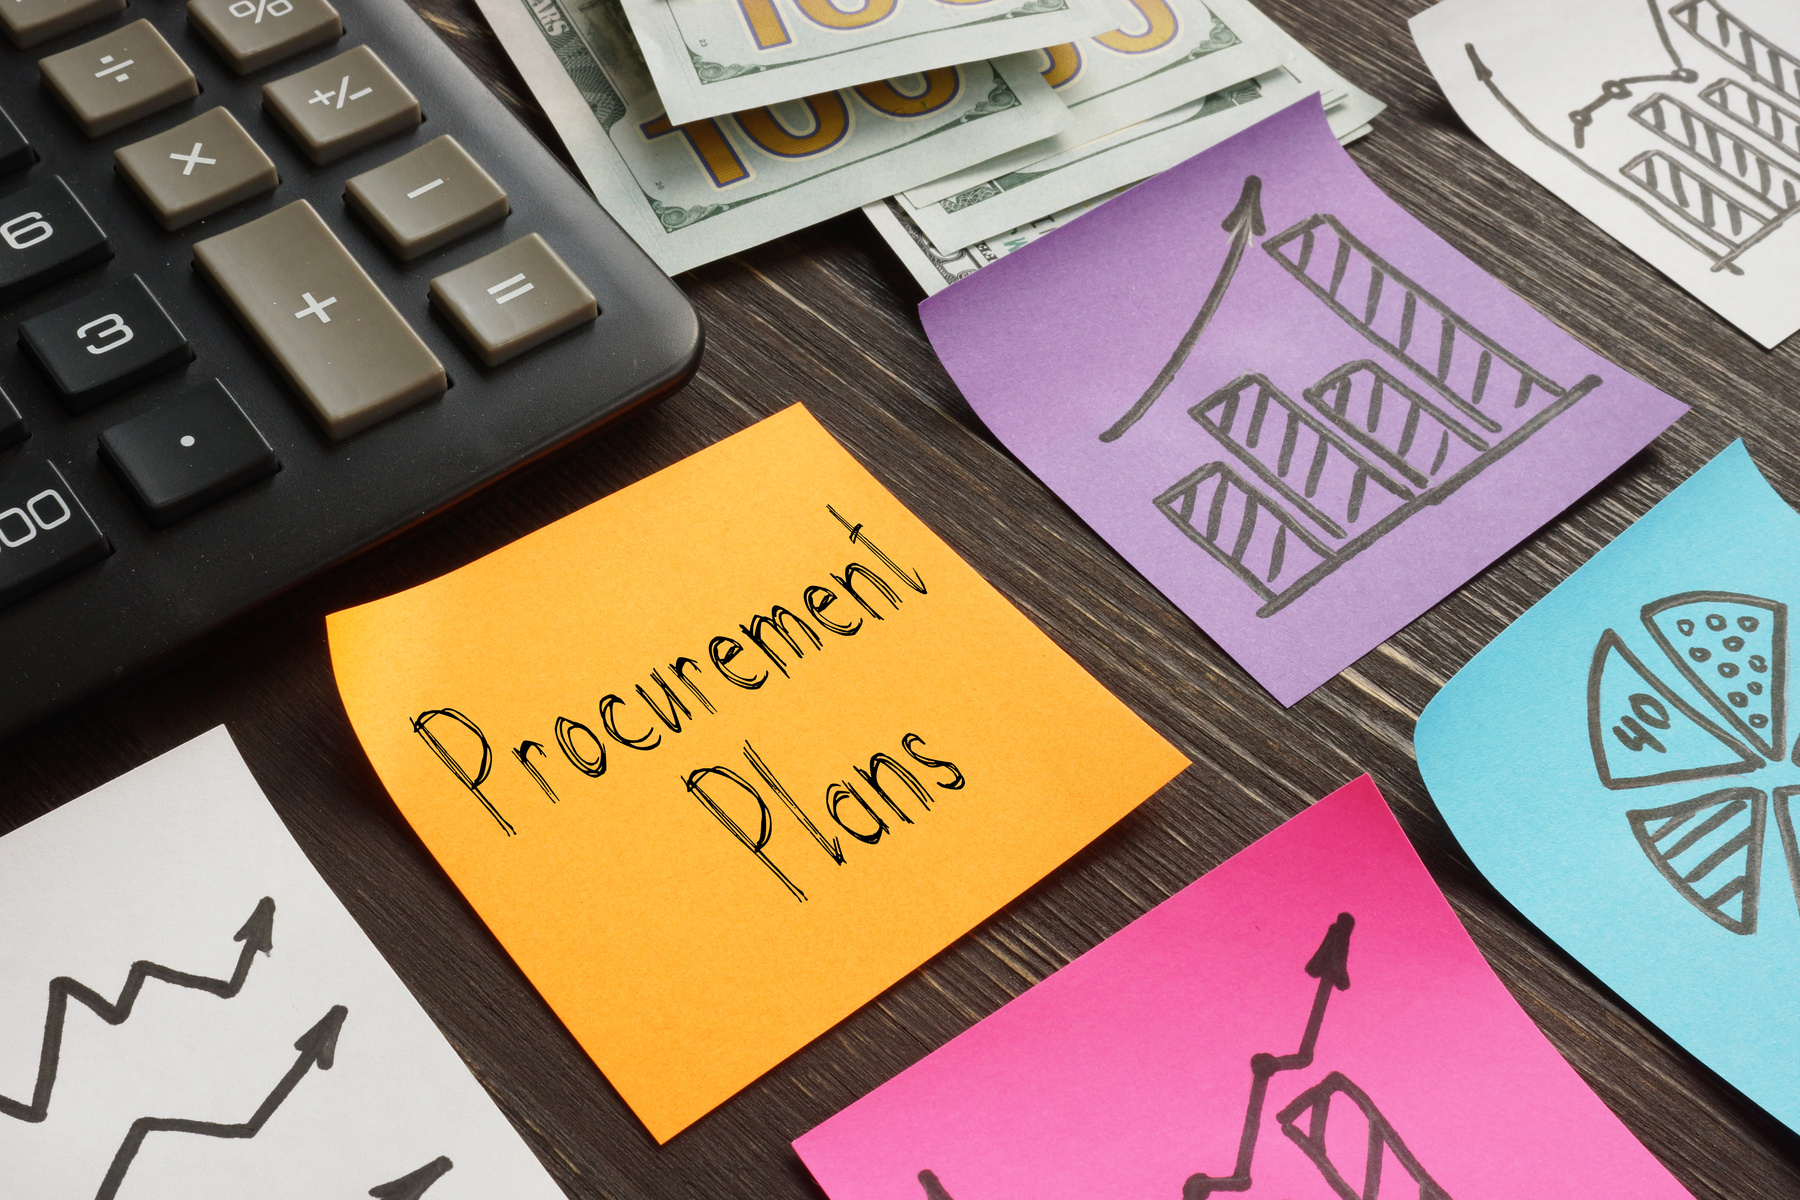 Procurement Plans are shown on the business photo using the text